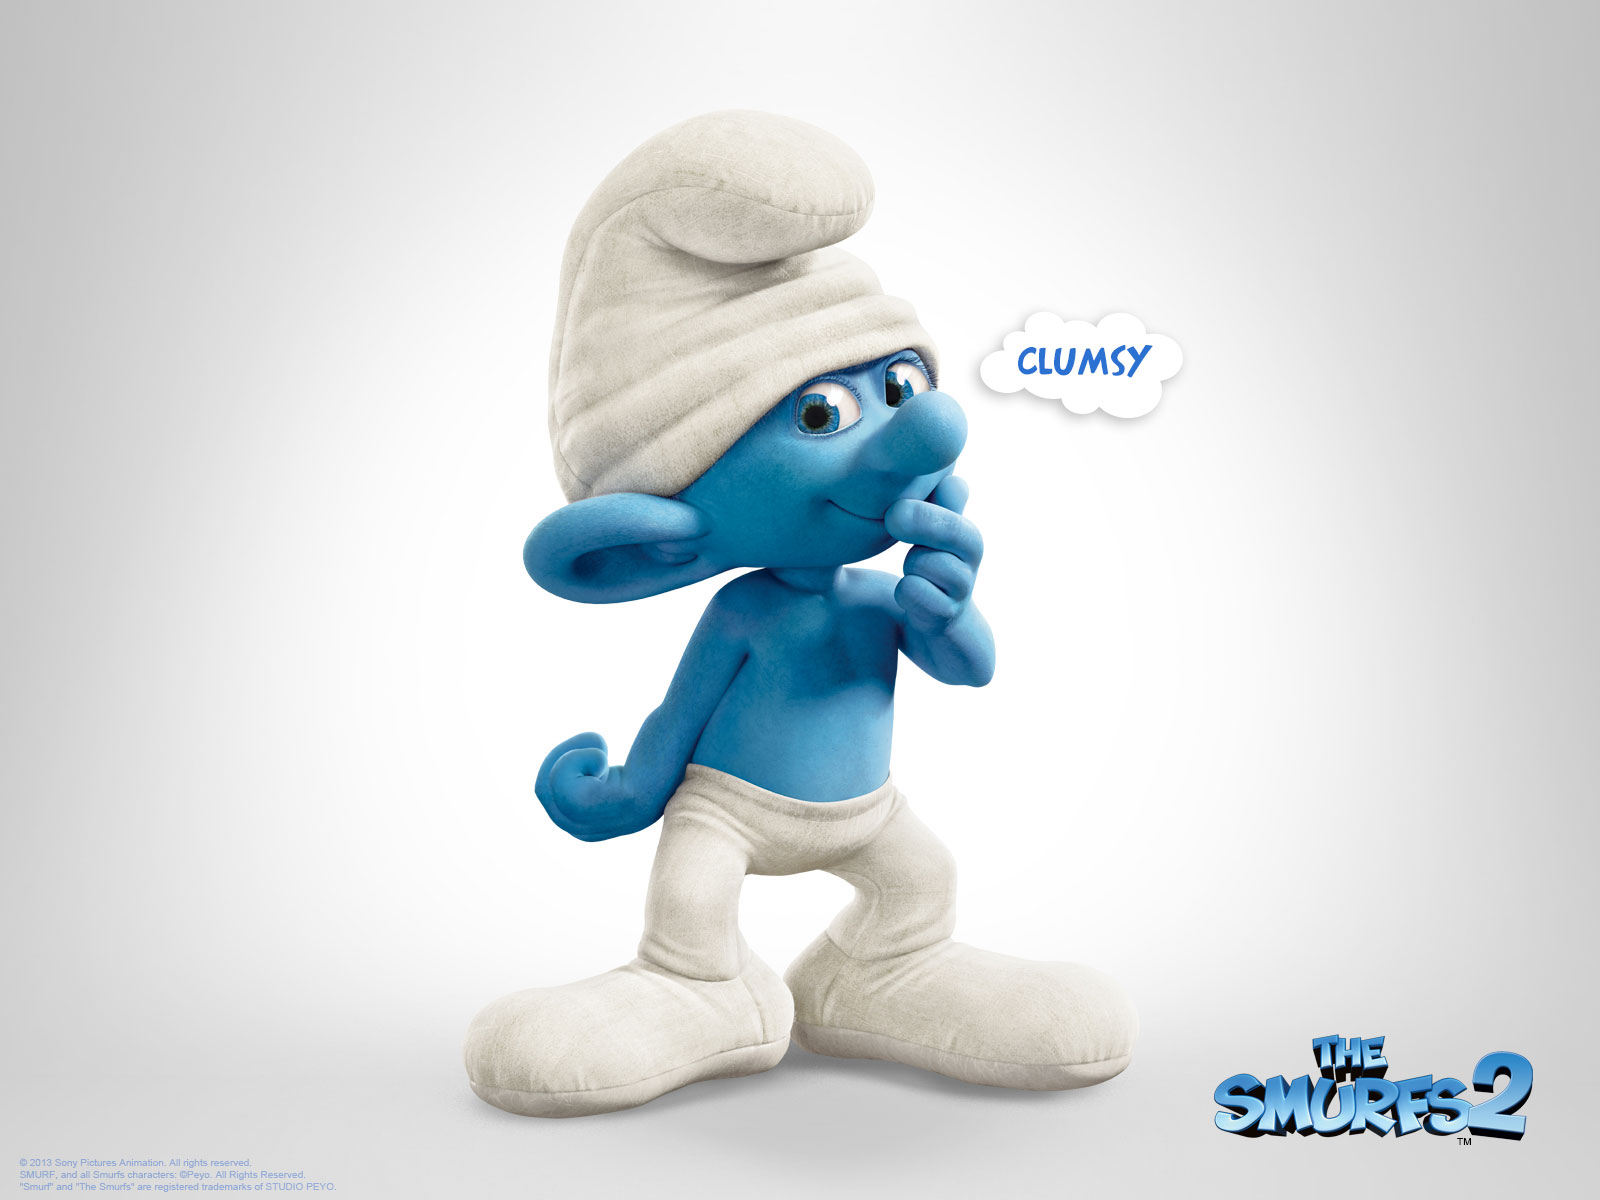 The Smurfs Clumsy Smurf Wallpaper HD